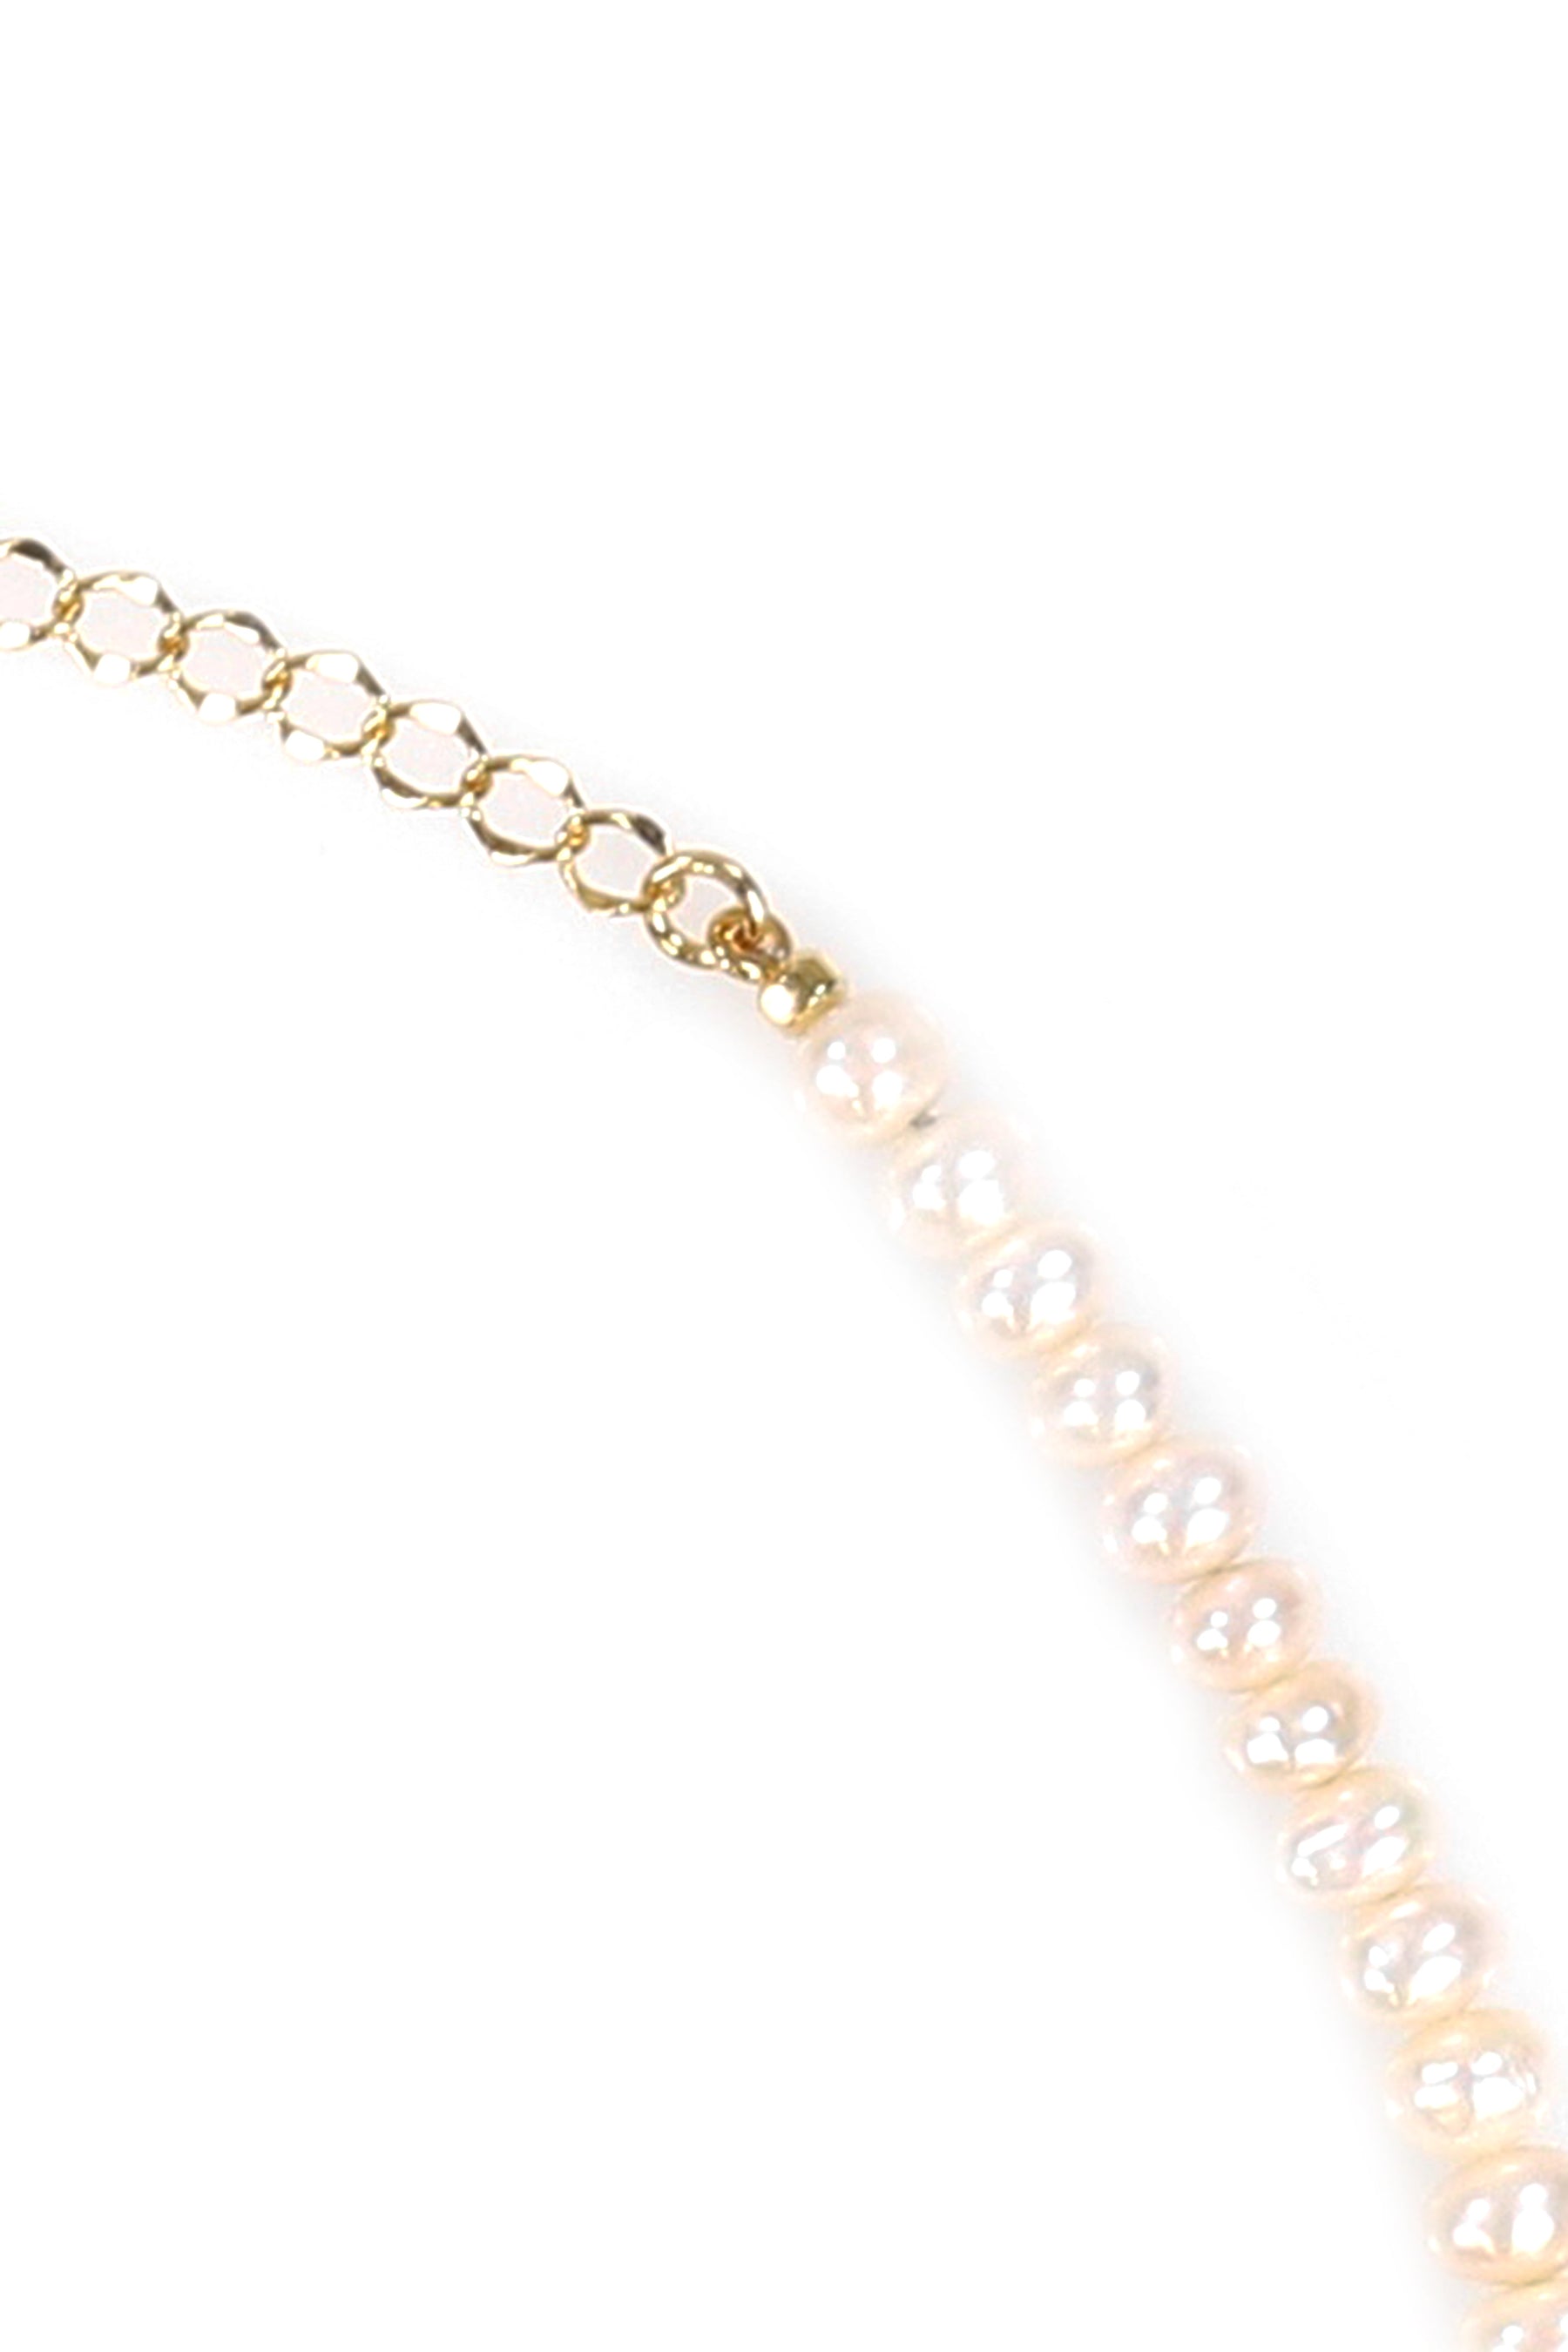 PEARLY CHAIN 001 / GOLD